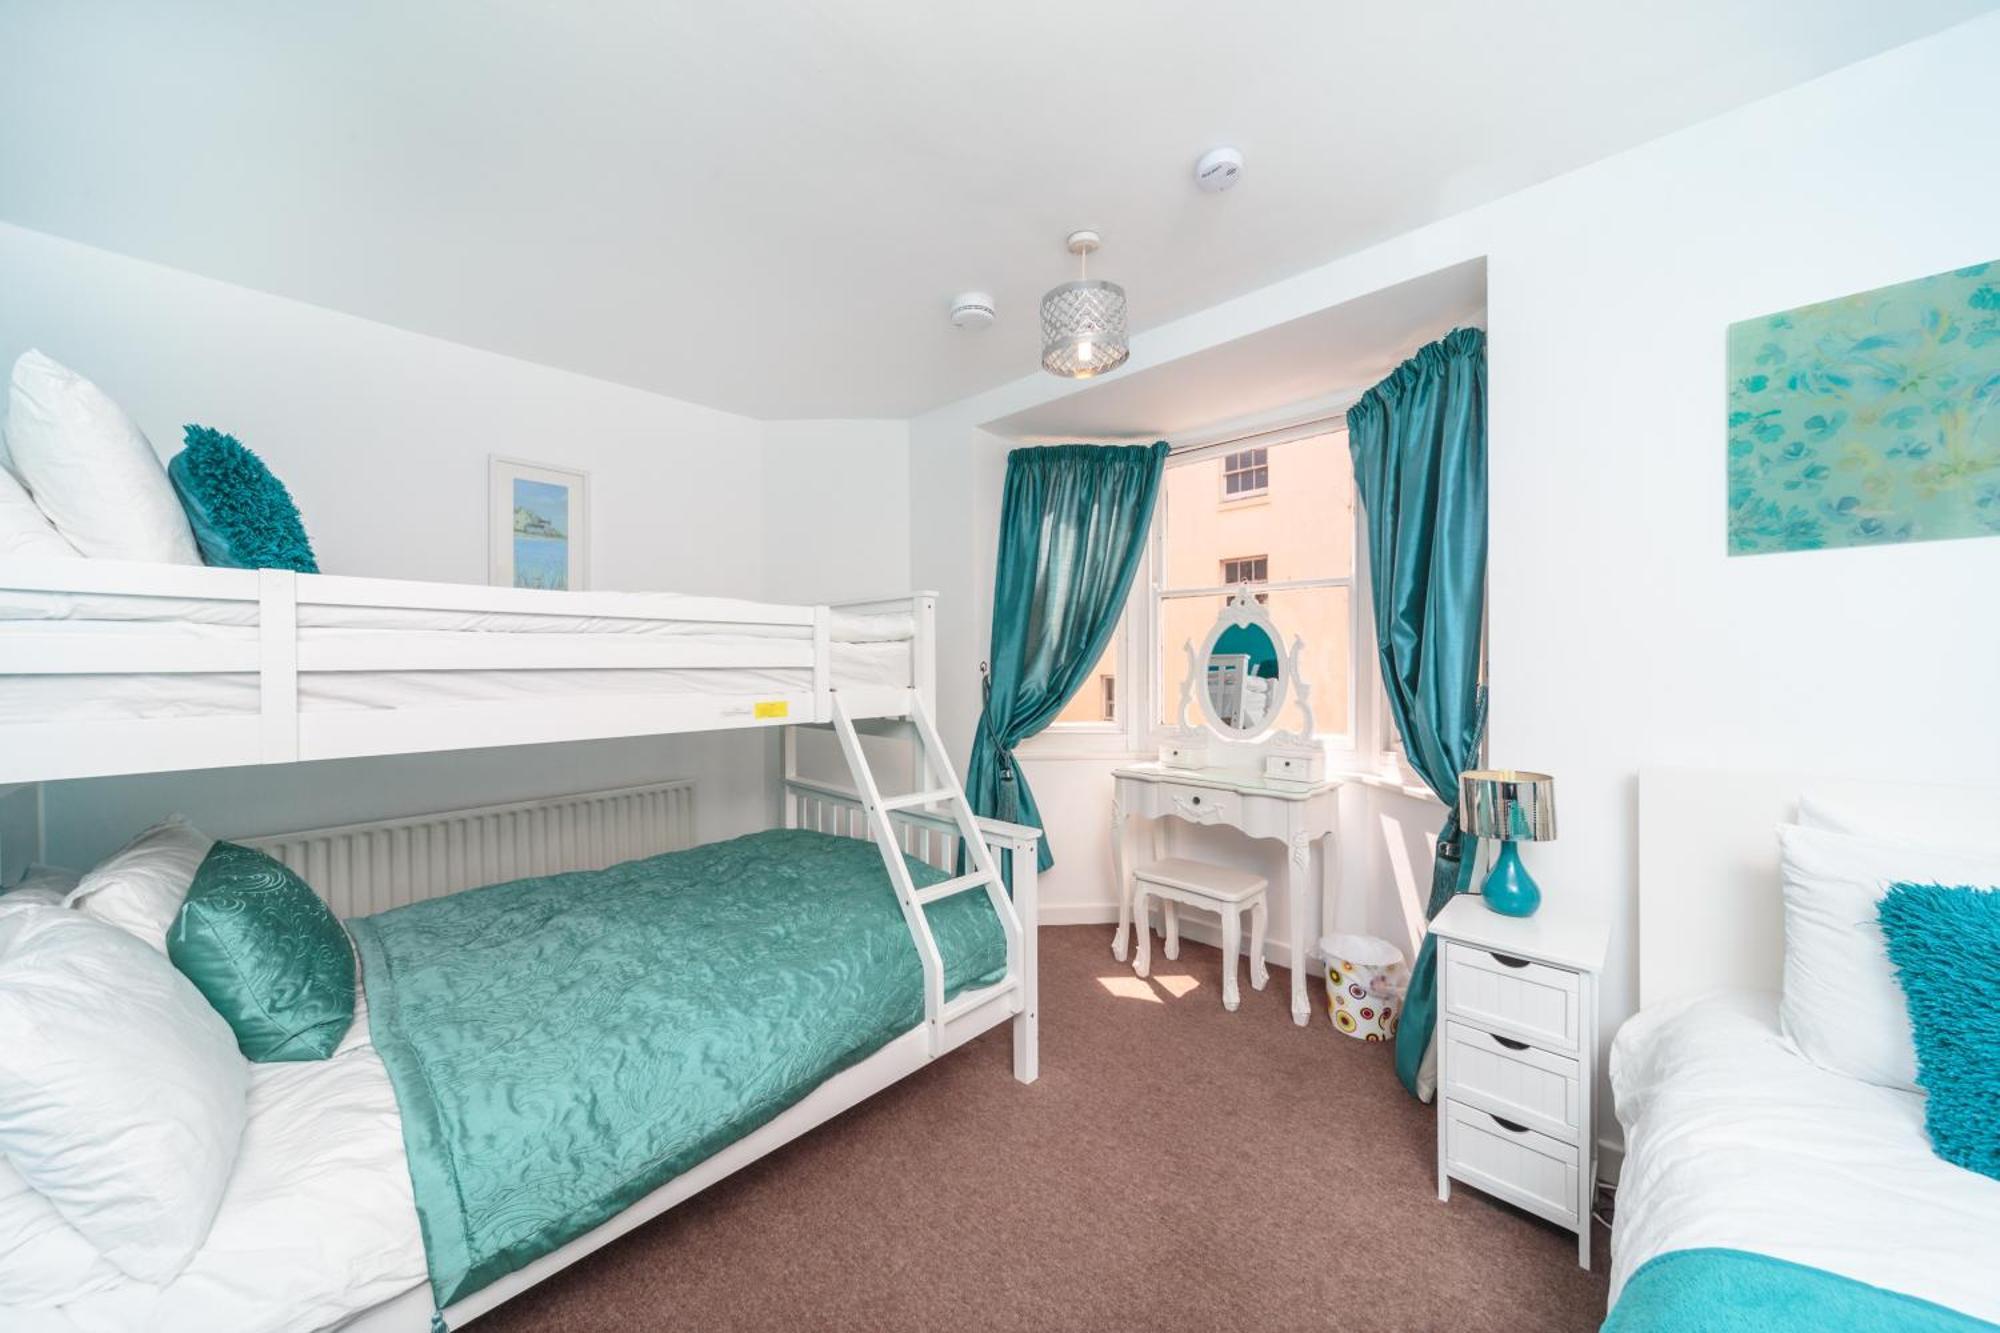 City Central Location, 2 Min To The Sea, 4-Bedroom St Margarers Townhouse, Car-Park & Conference Centre Nearby, Shops, Coffee Shops & Restaurants - Walking Distance Hove Buitenkant foto